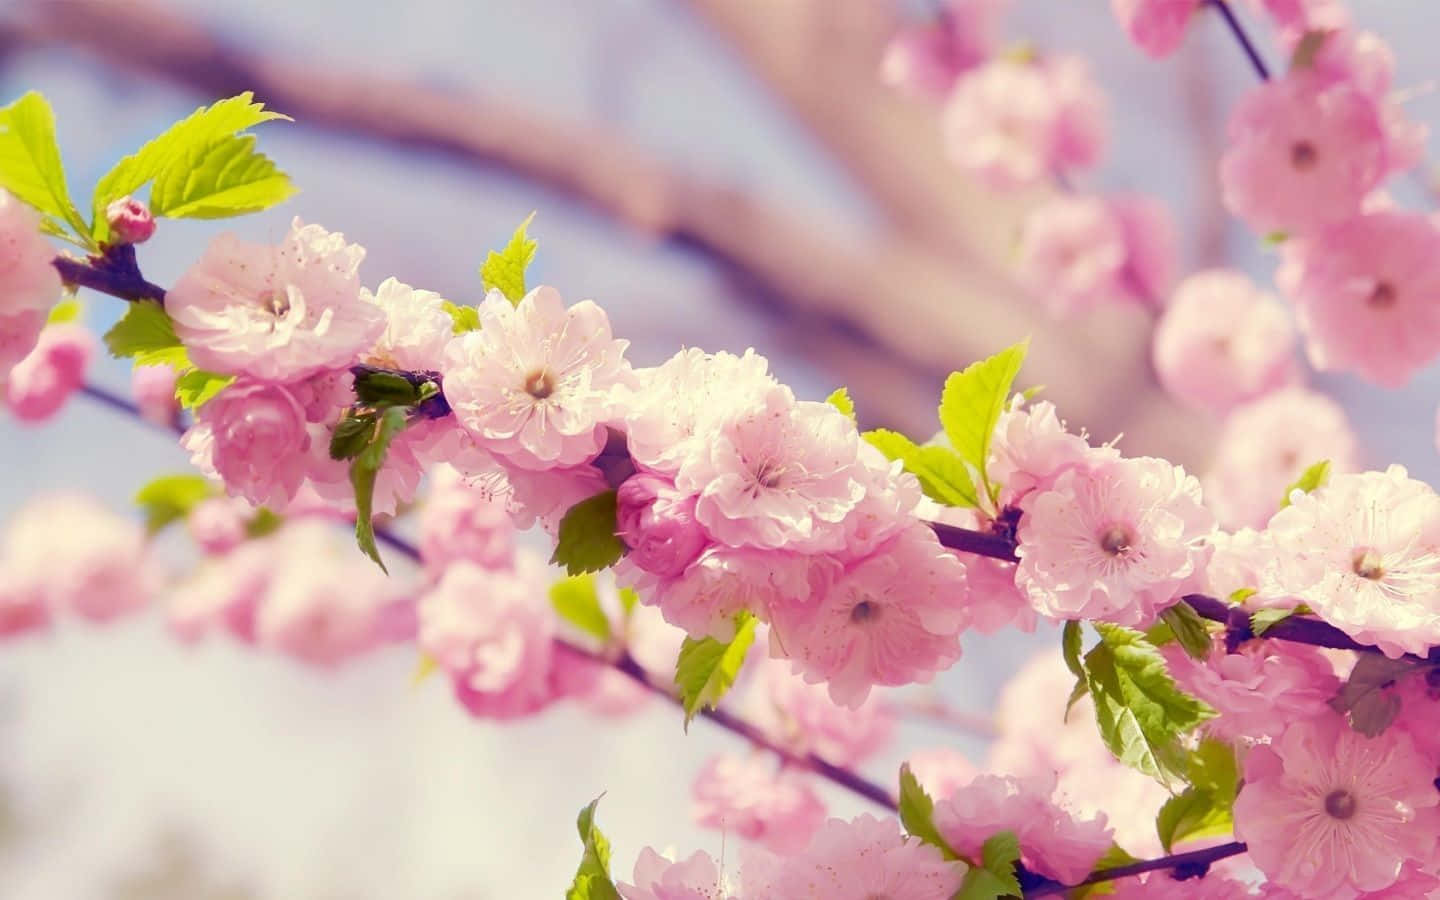 Pink Cherry Blossoms On A Branch With Green Leaves